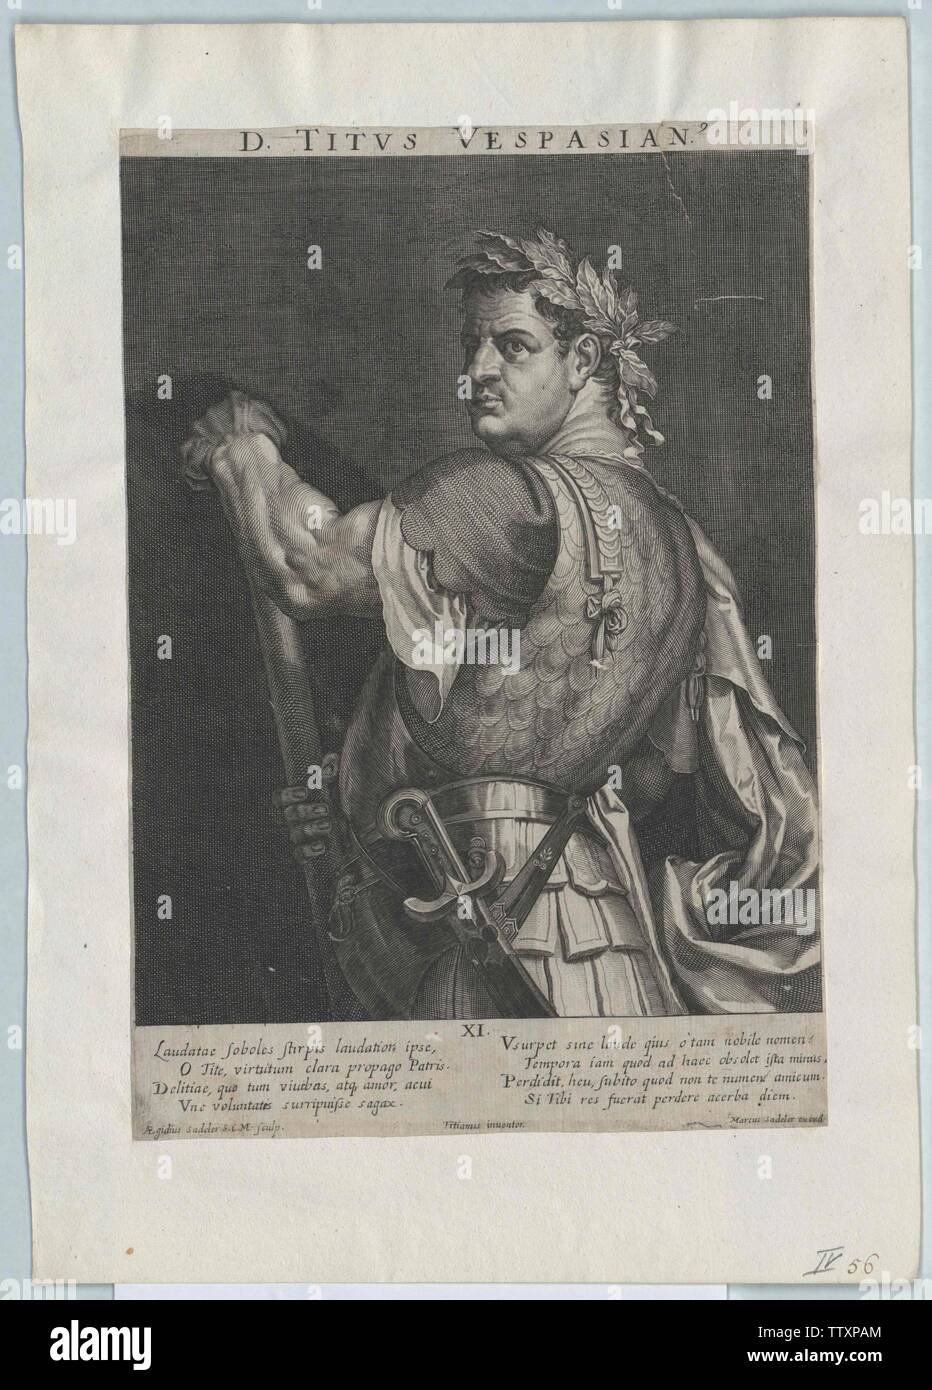 Titus, Römischer Kaiser, Additional-Rights - Clearance-Info - Not-Available Stockfoto